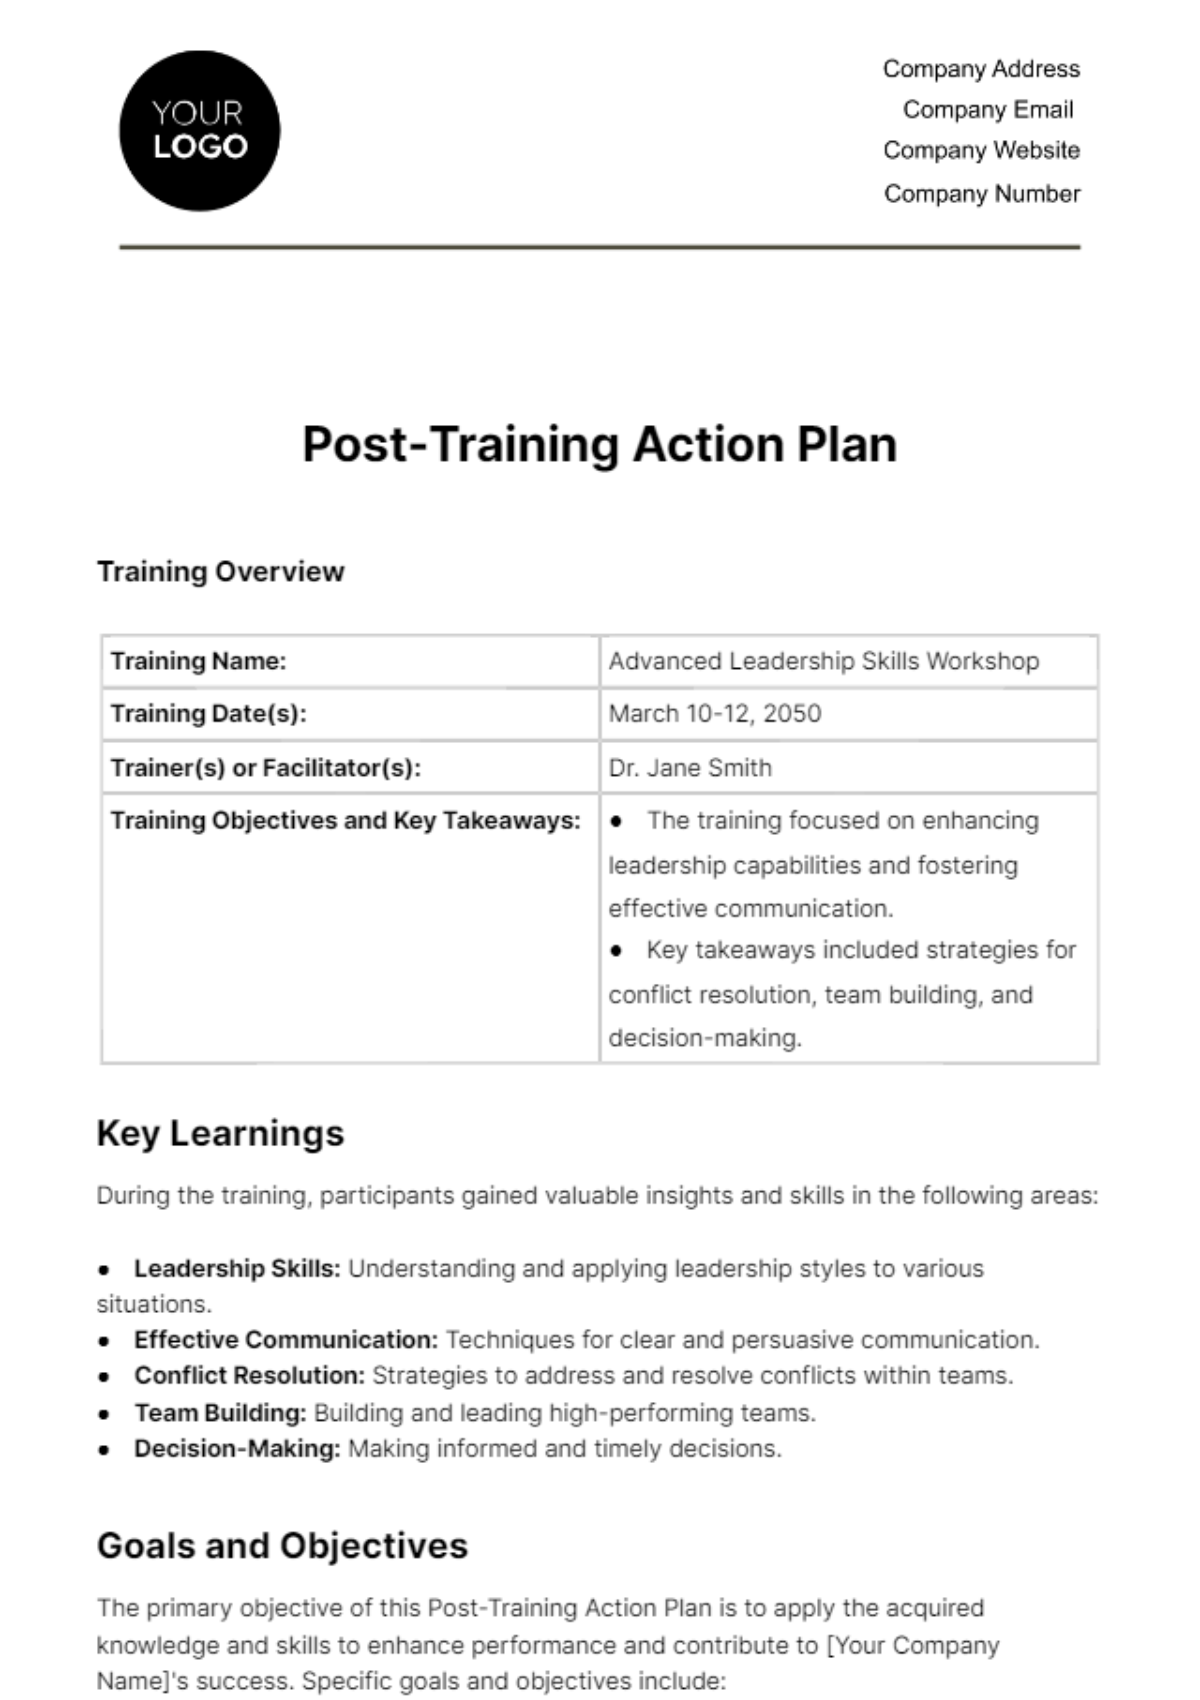 Post-Training Action Plan HR Template